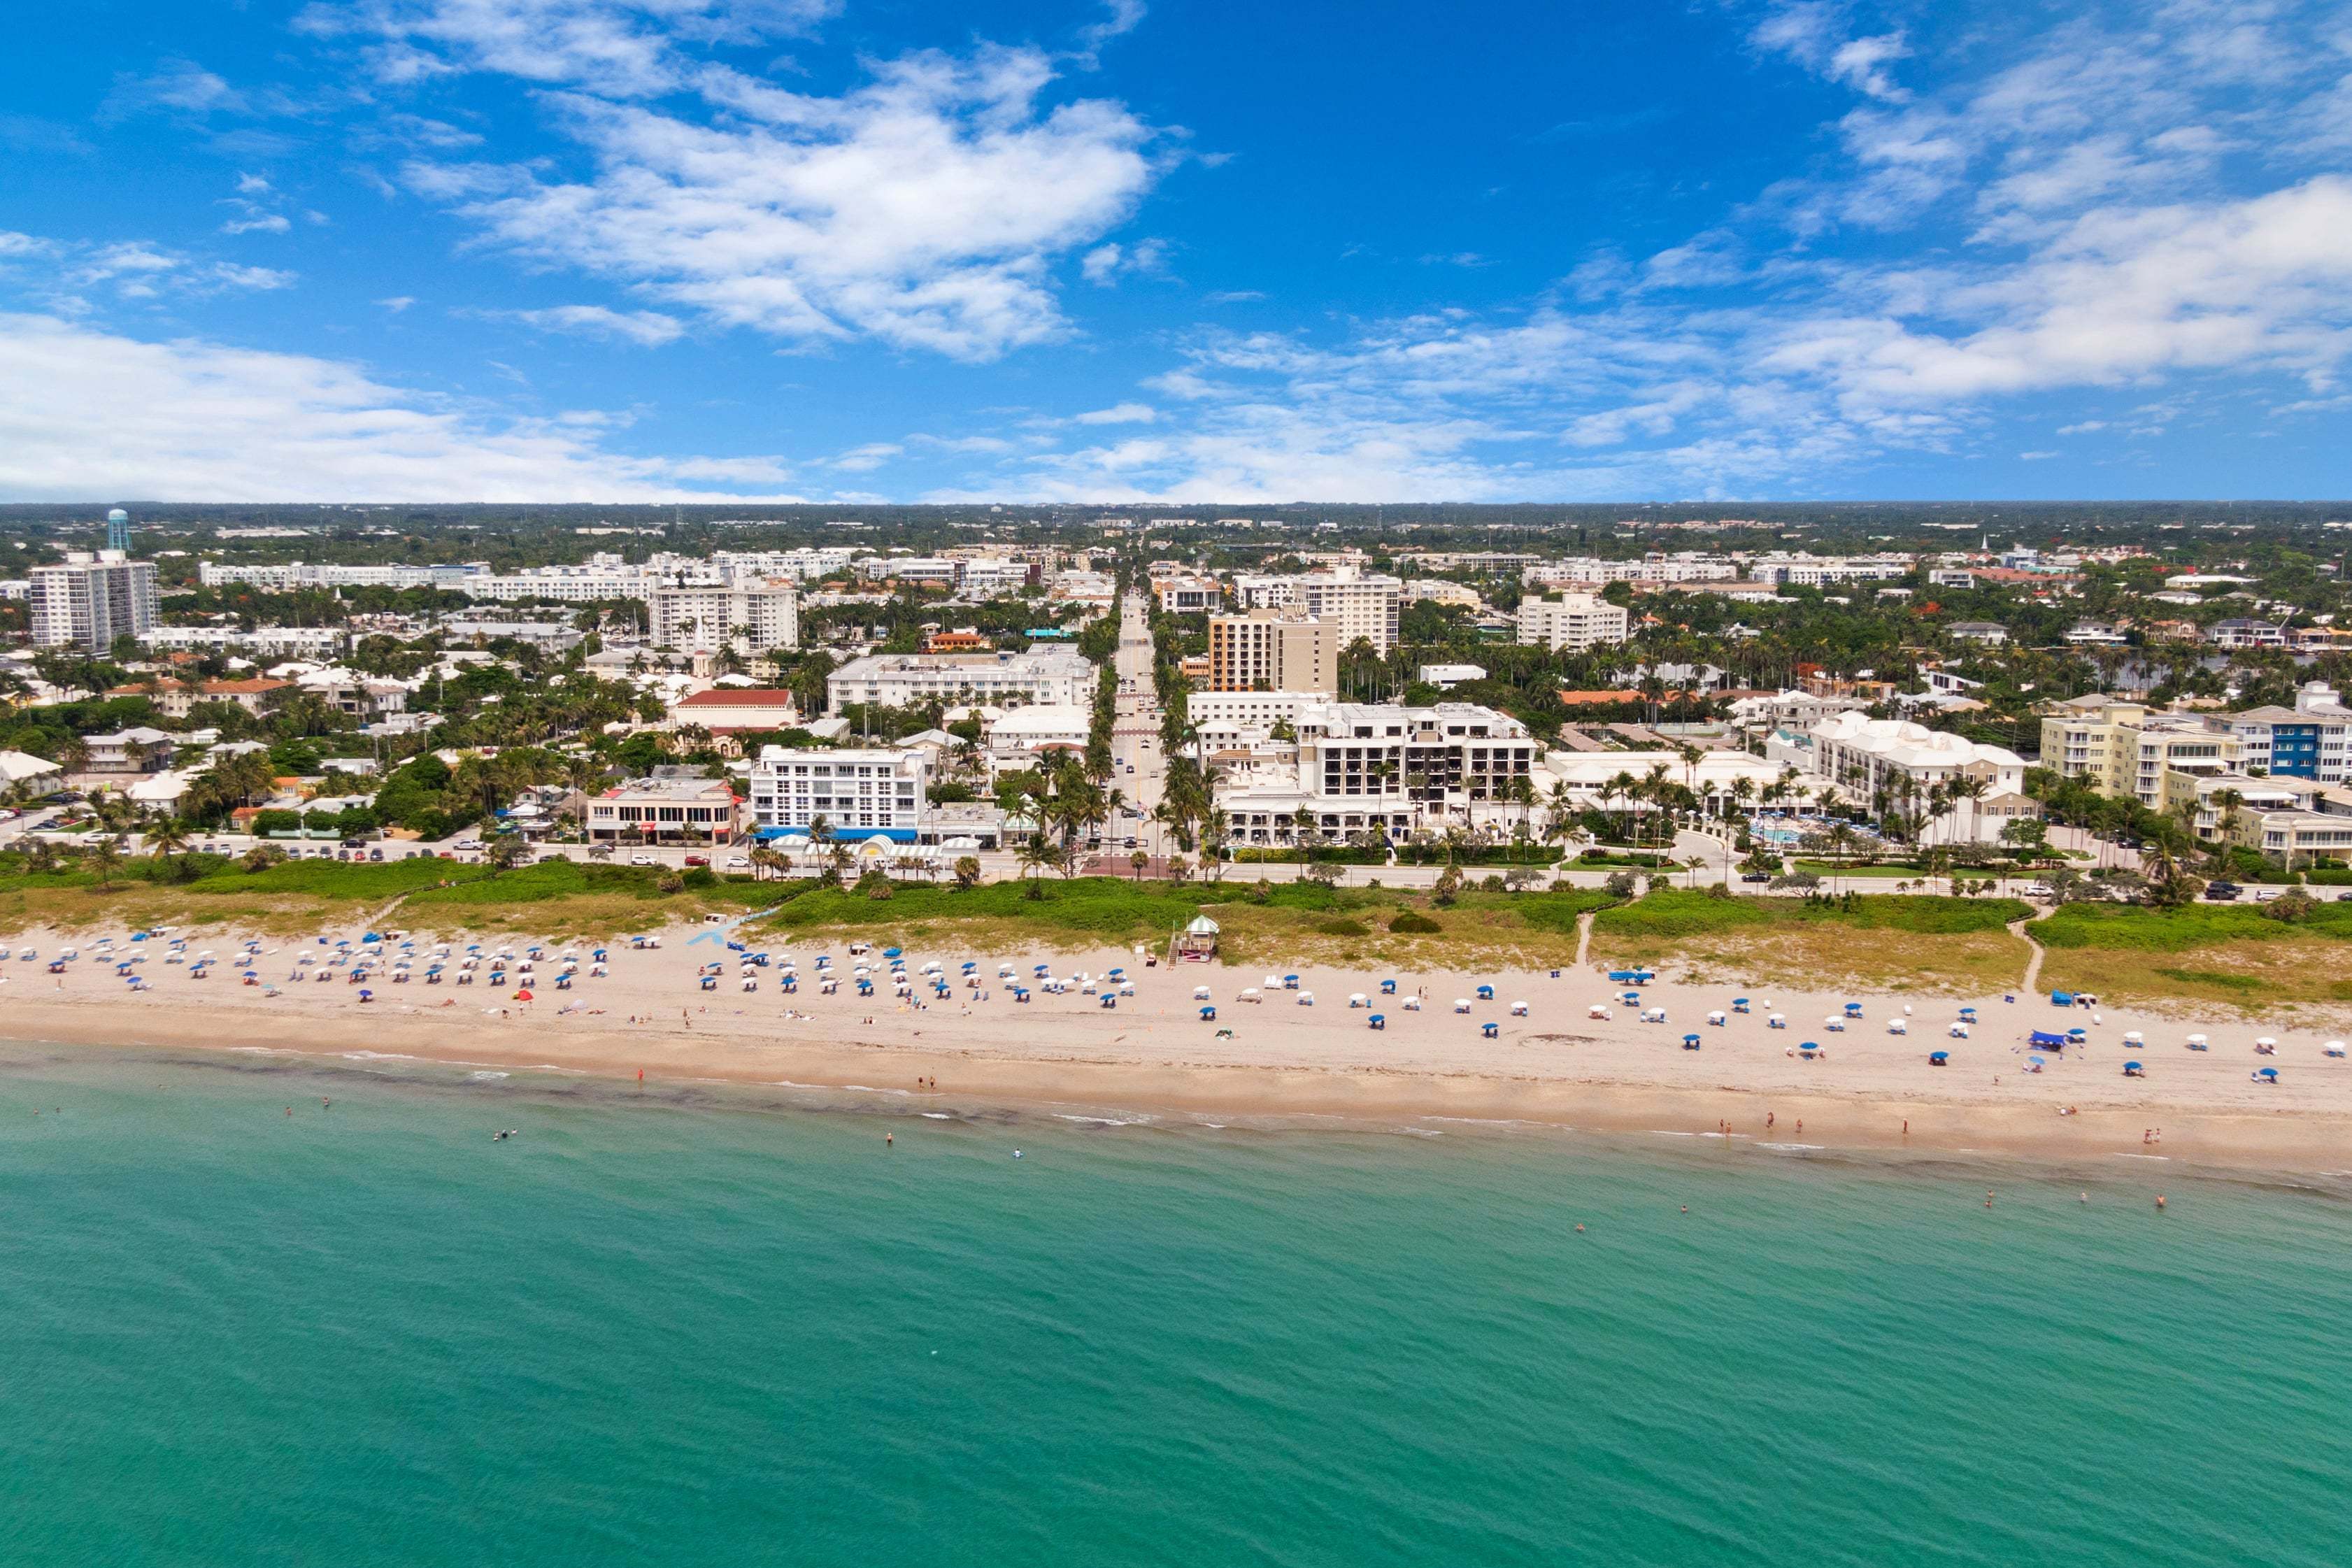 delray beach arial view